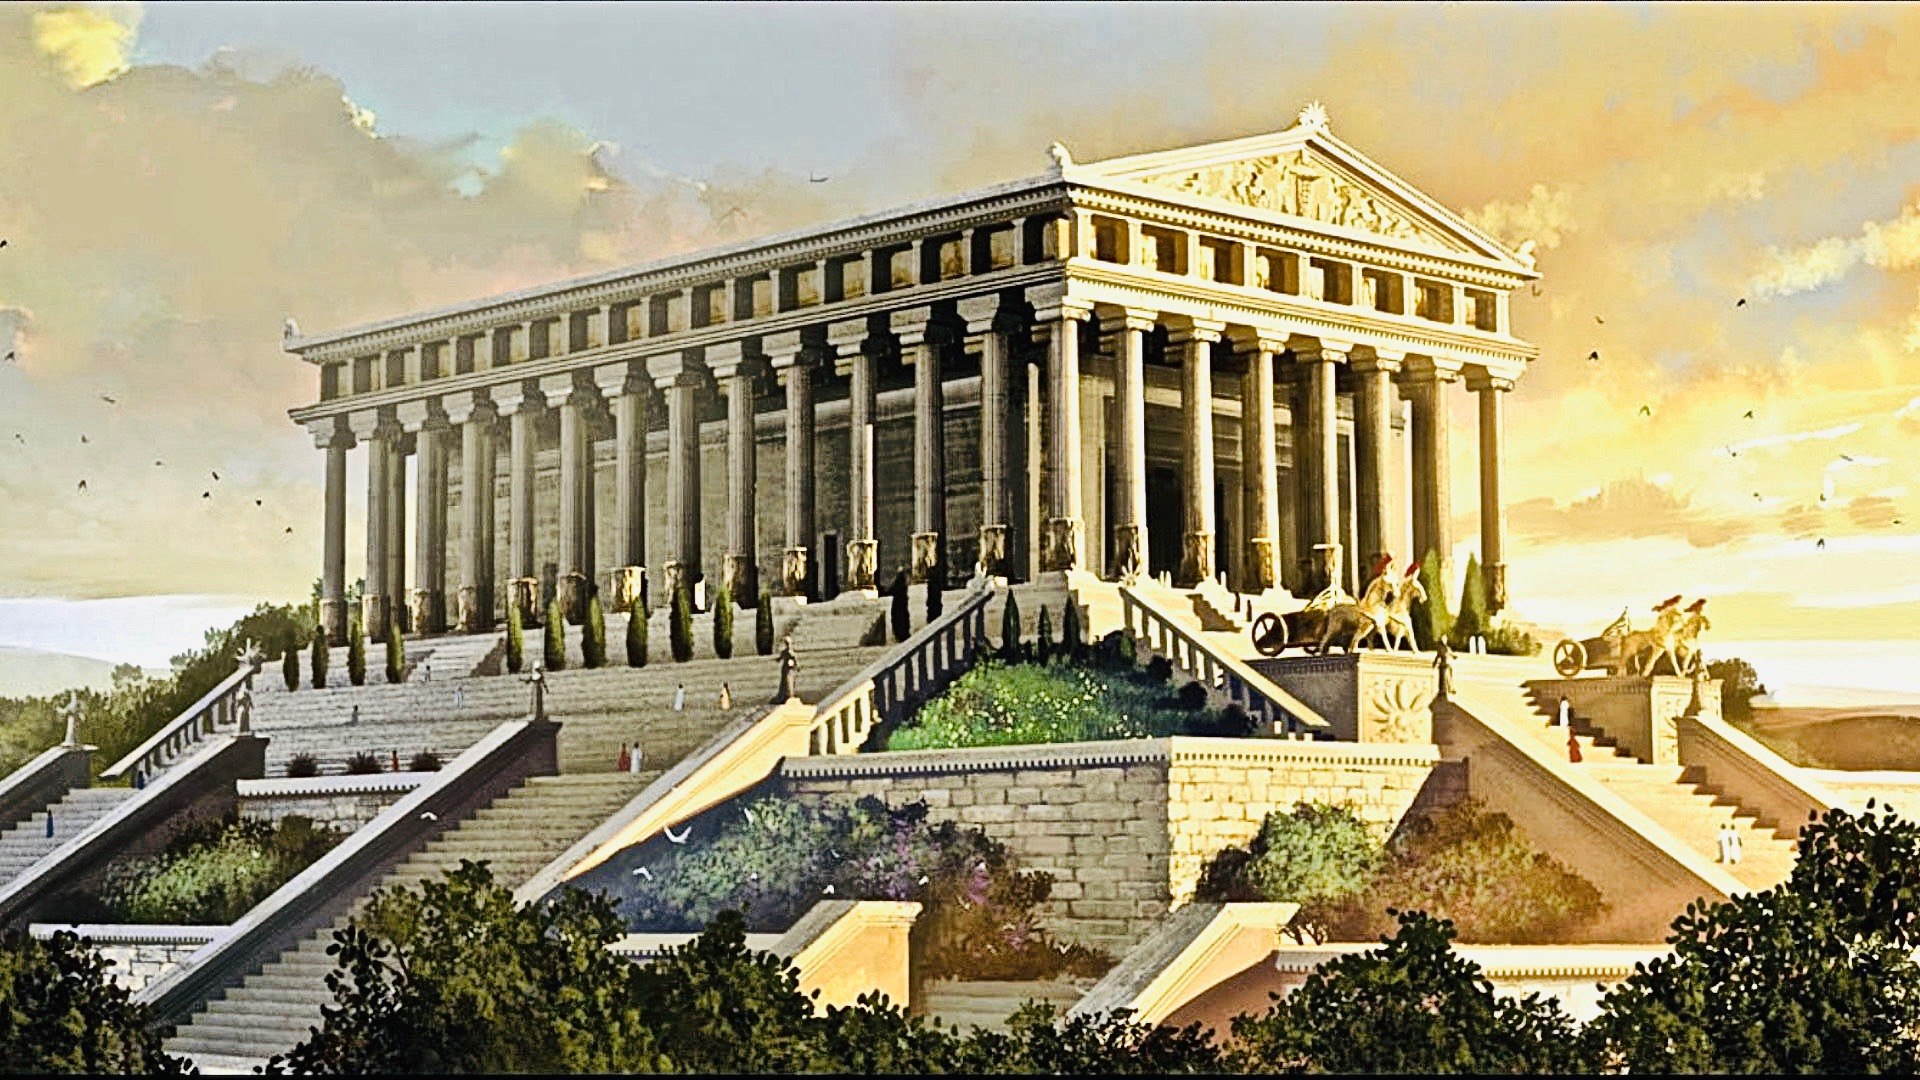 Temple Of Artemis 7th Wonder The World Video Dailymotion